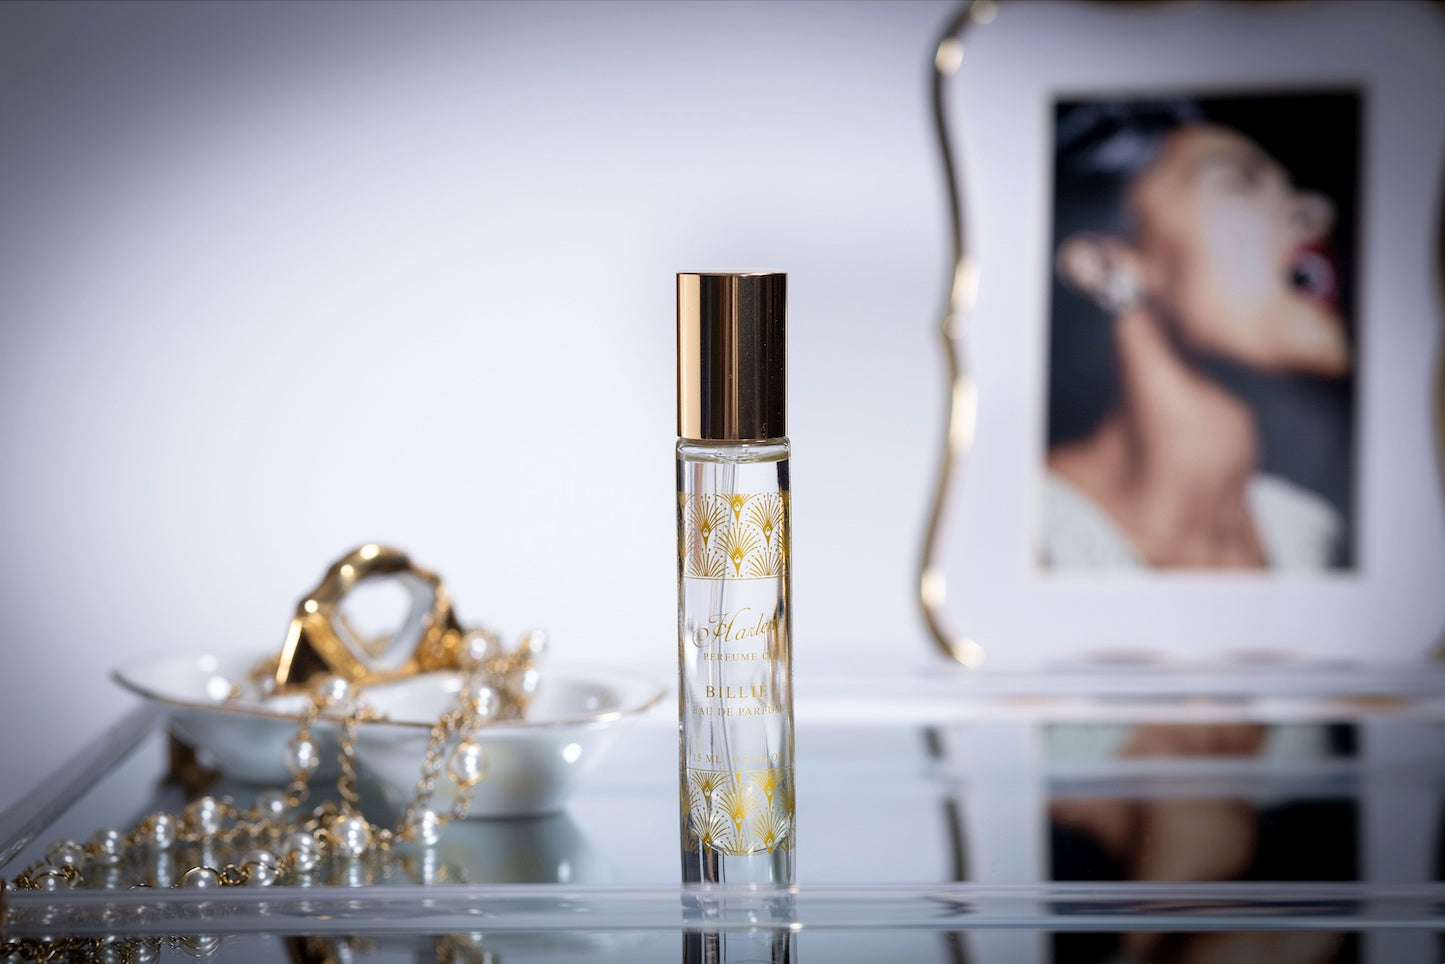 This is a lifestyle image of our Billie 15 ML perfume bottle, sitting on a mirror with an image of Billie Holiday in the background